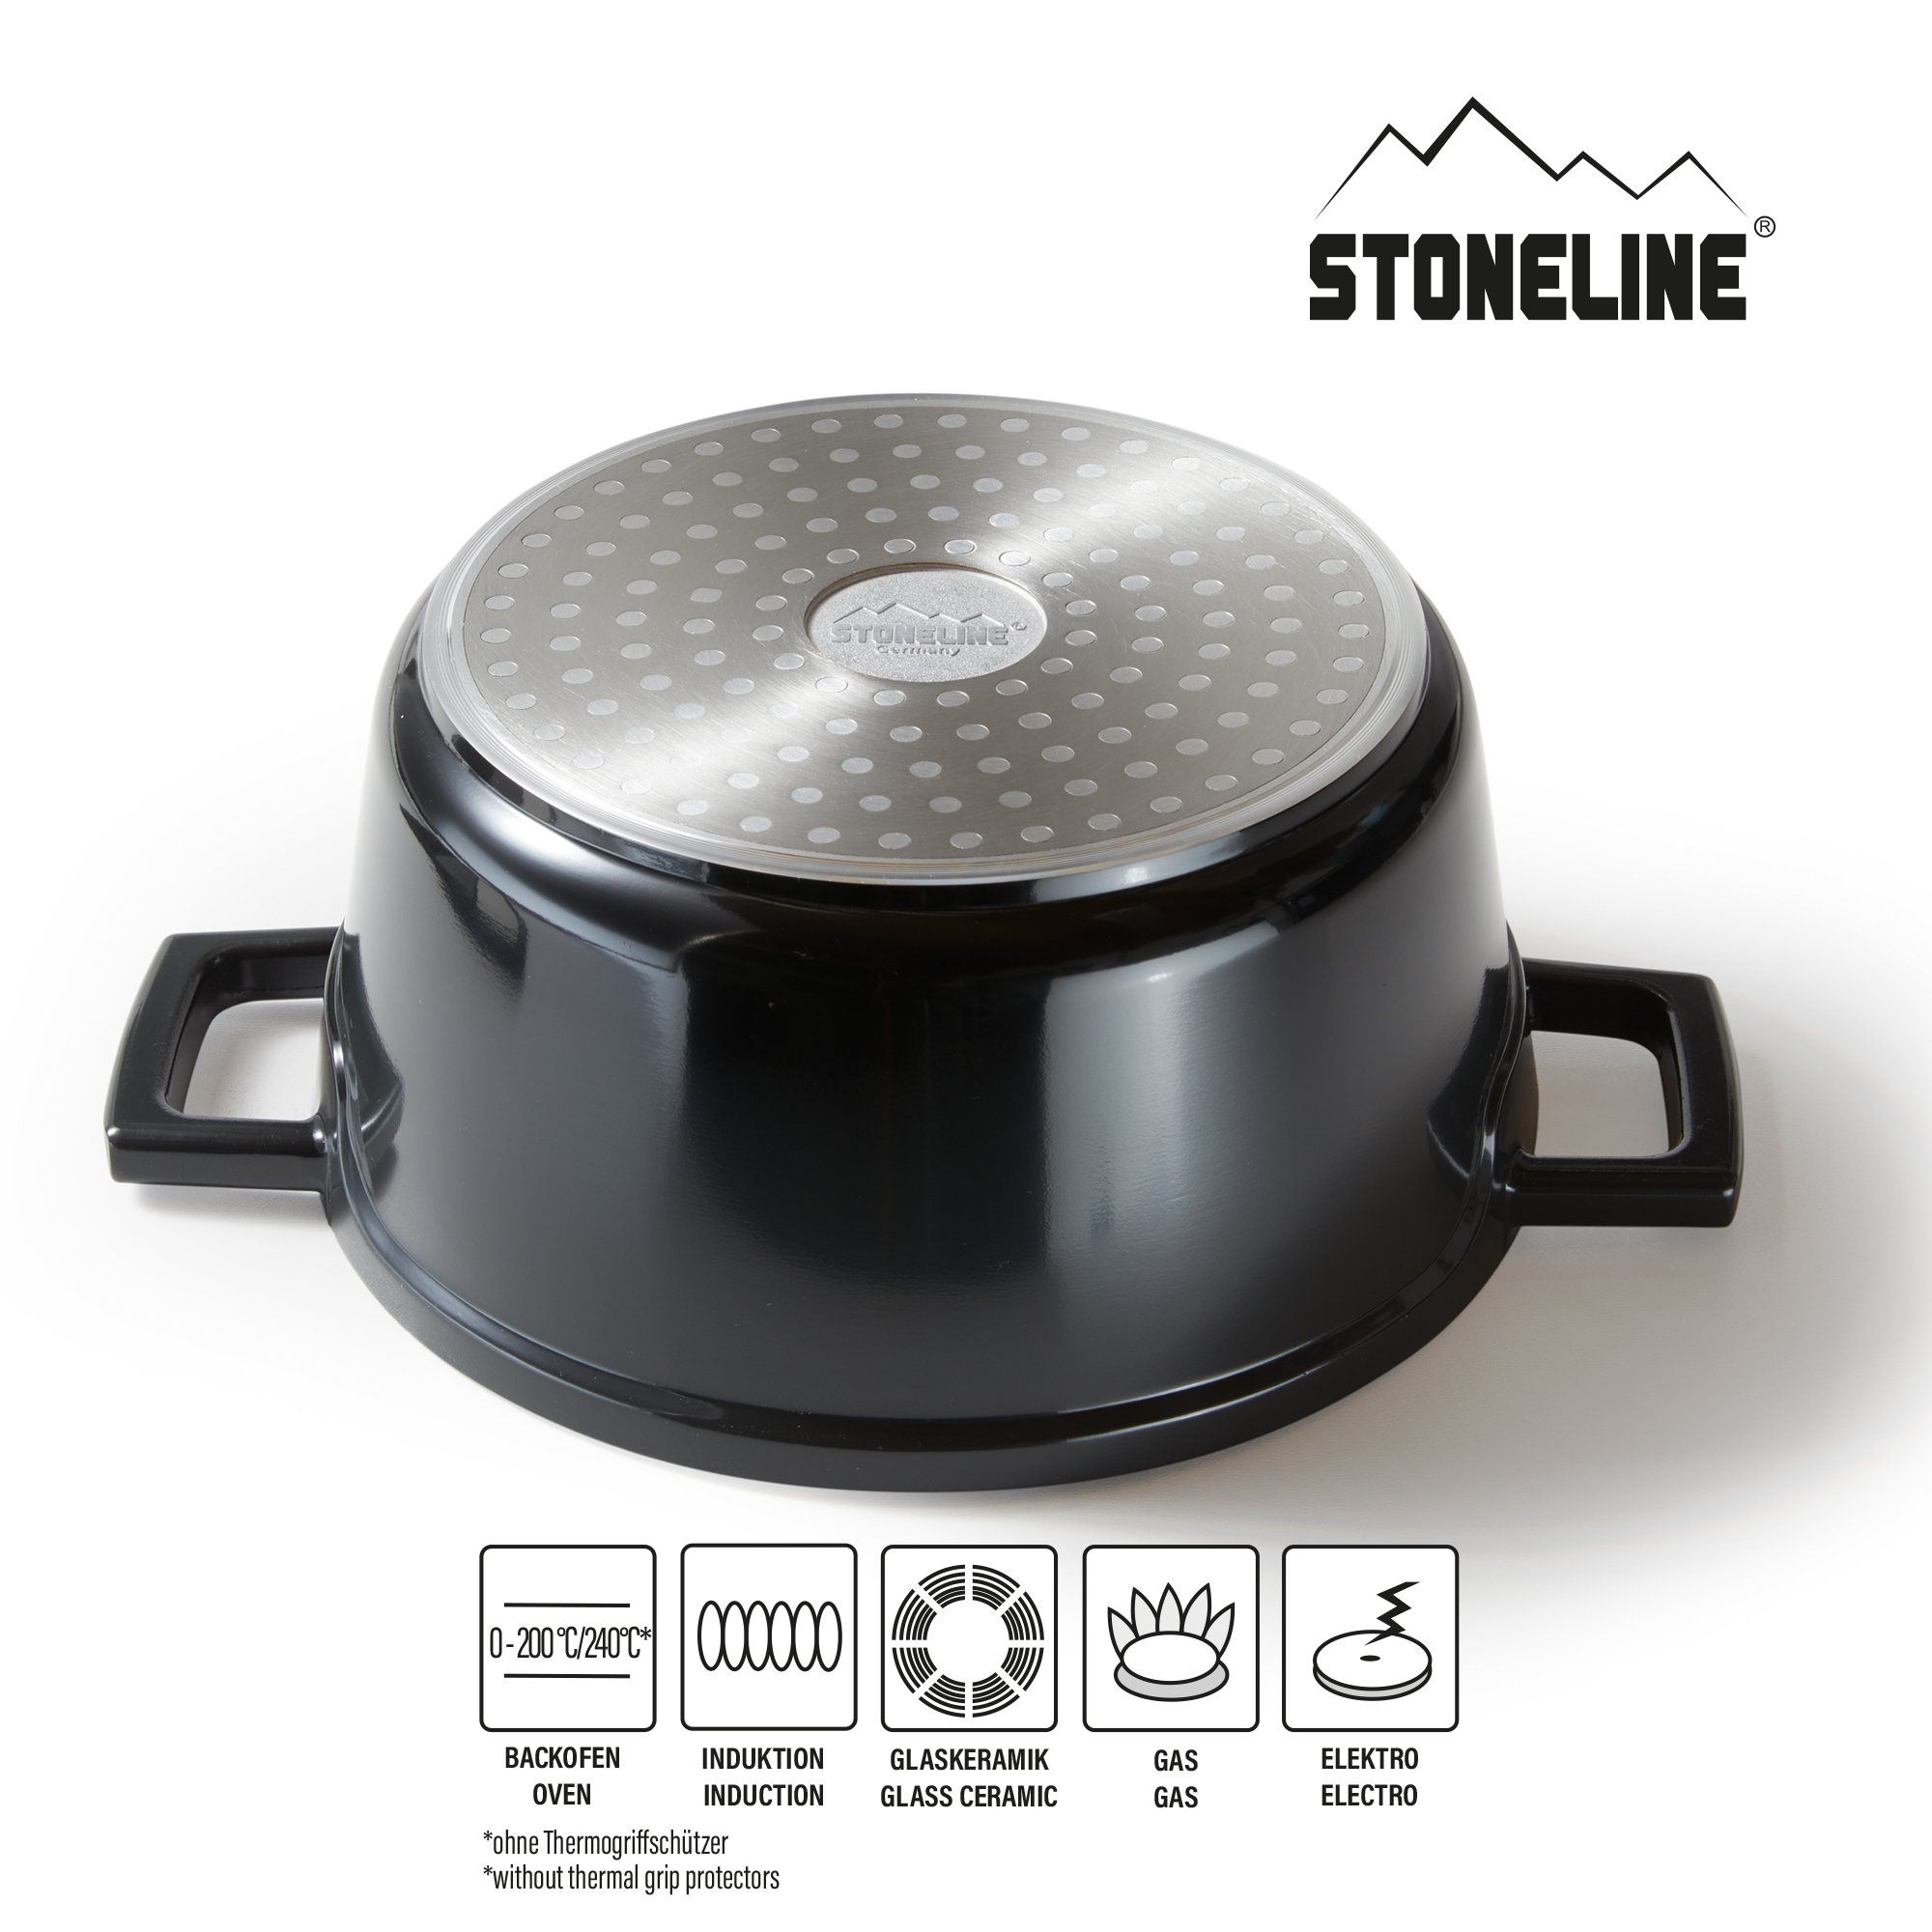 STONELINE® Gourmet roaster 20 cm with lid, oven and induction suitable, non-stick coating, black